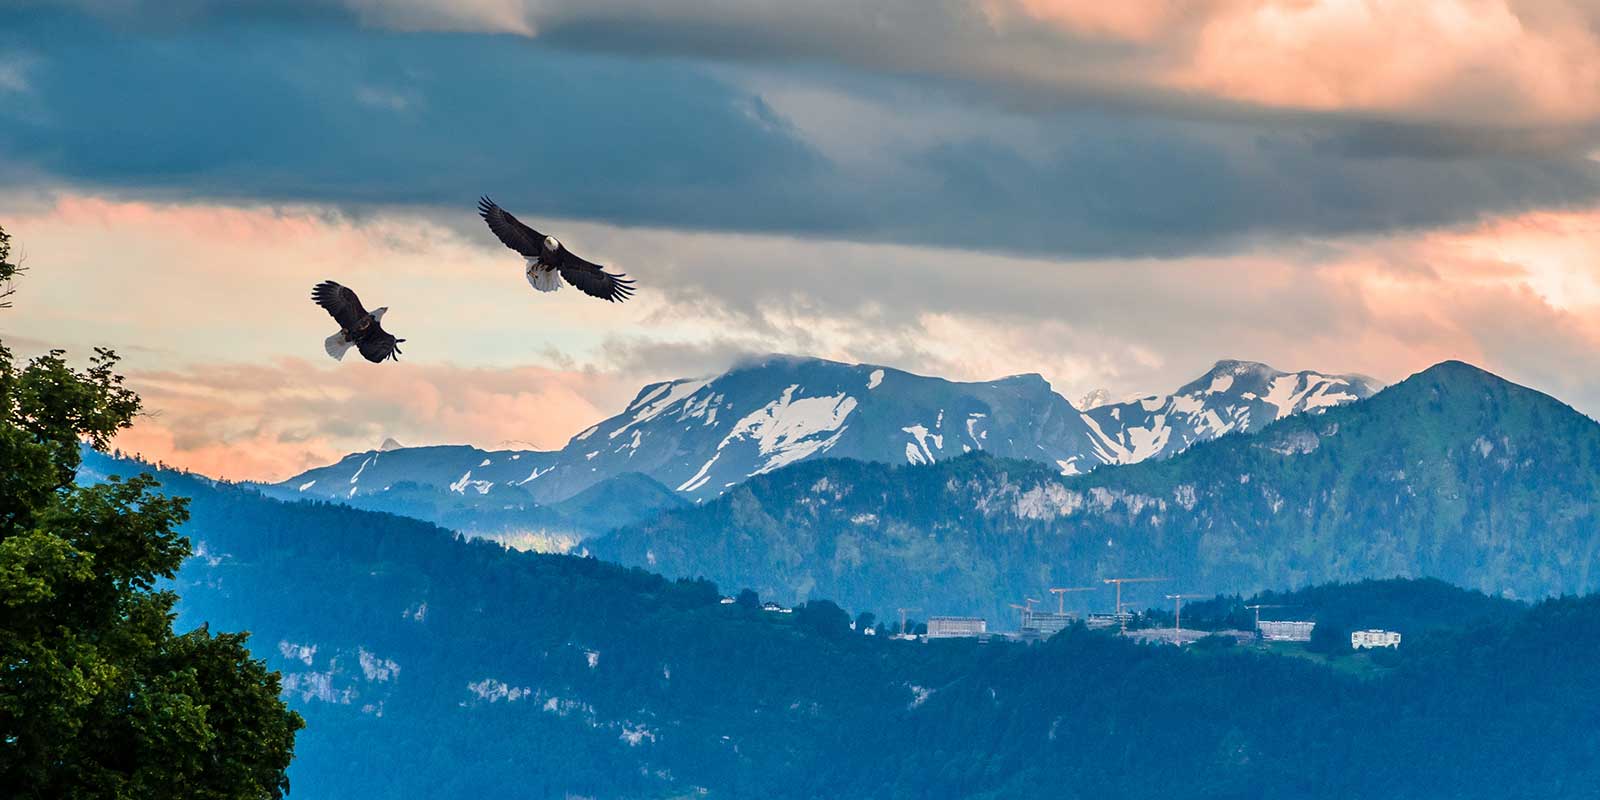 Two eagles flying high over a mountain range